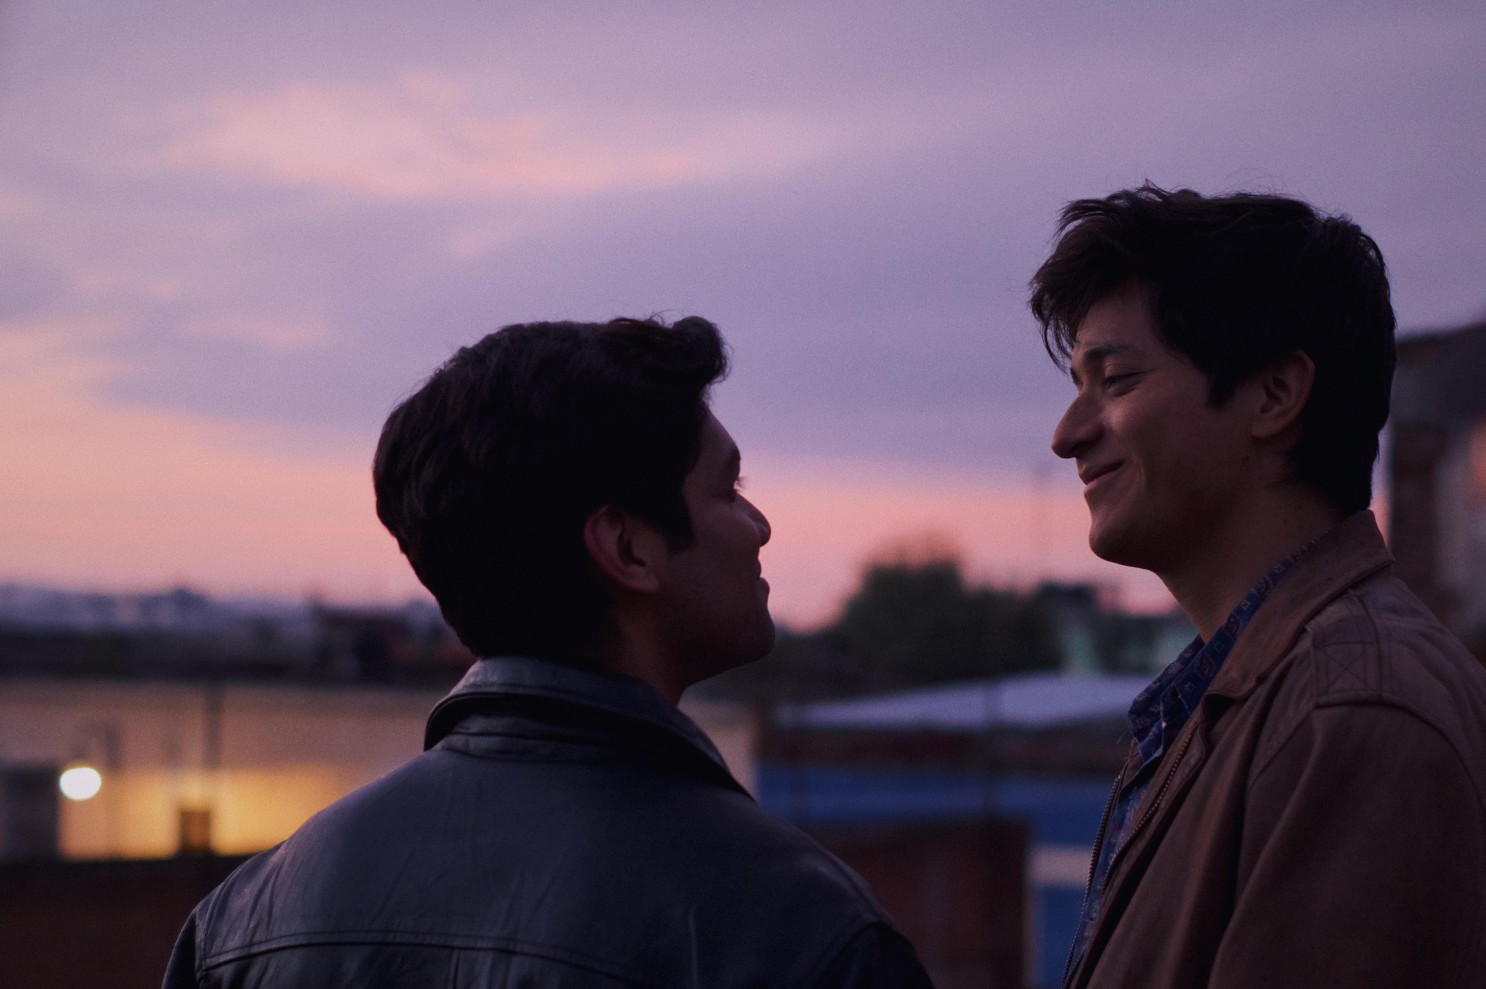 Two men look at each other with love at sunrise.